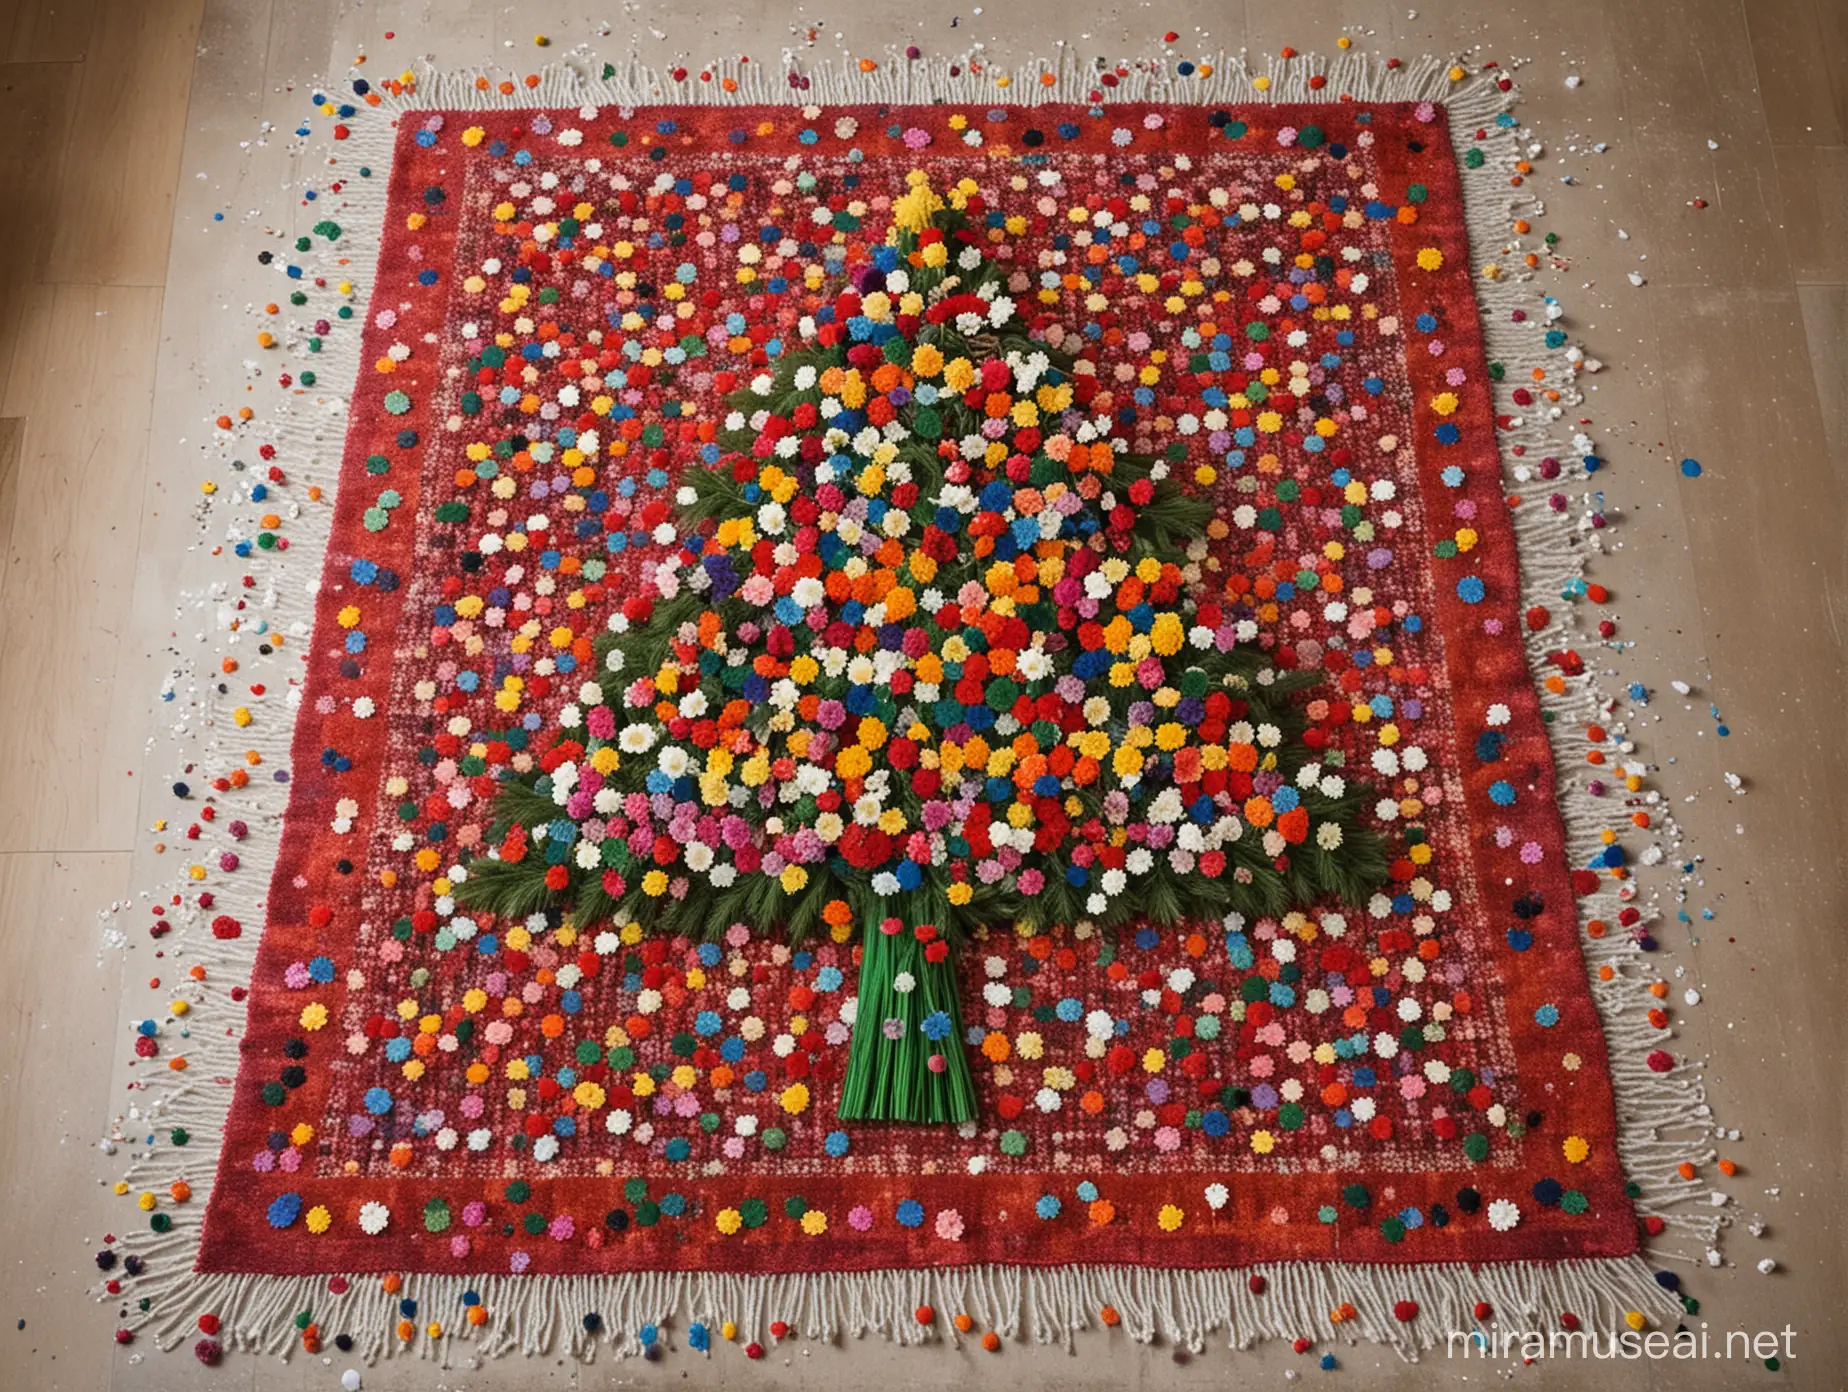 A christmas tree shape that ha s approx 150 assorted cut flower heads stuck to the 2D surface shape. The tree is standing on an Indian rug. On the rug and around the base are many coloured paint spills and many empty tubes of paint randomly strewn around